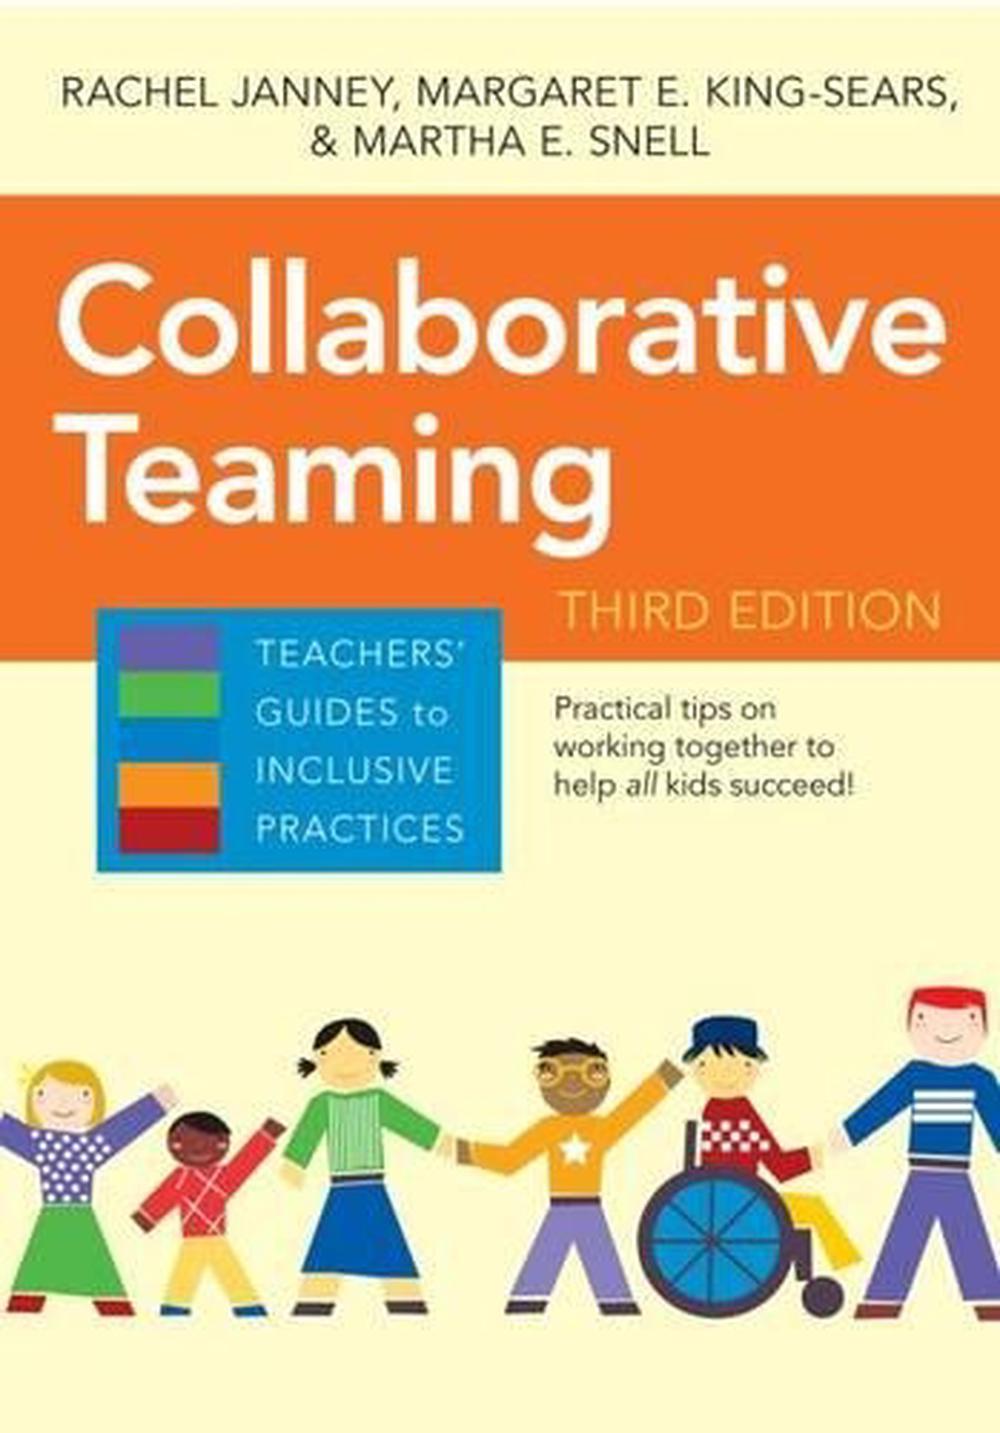 Collaborative Teaming by Rachel Janney (English) Paperback Book Free ...